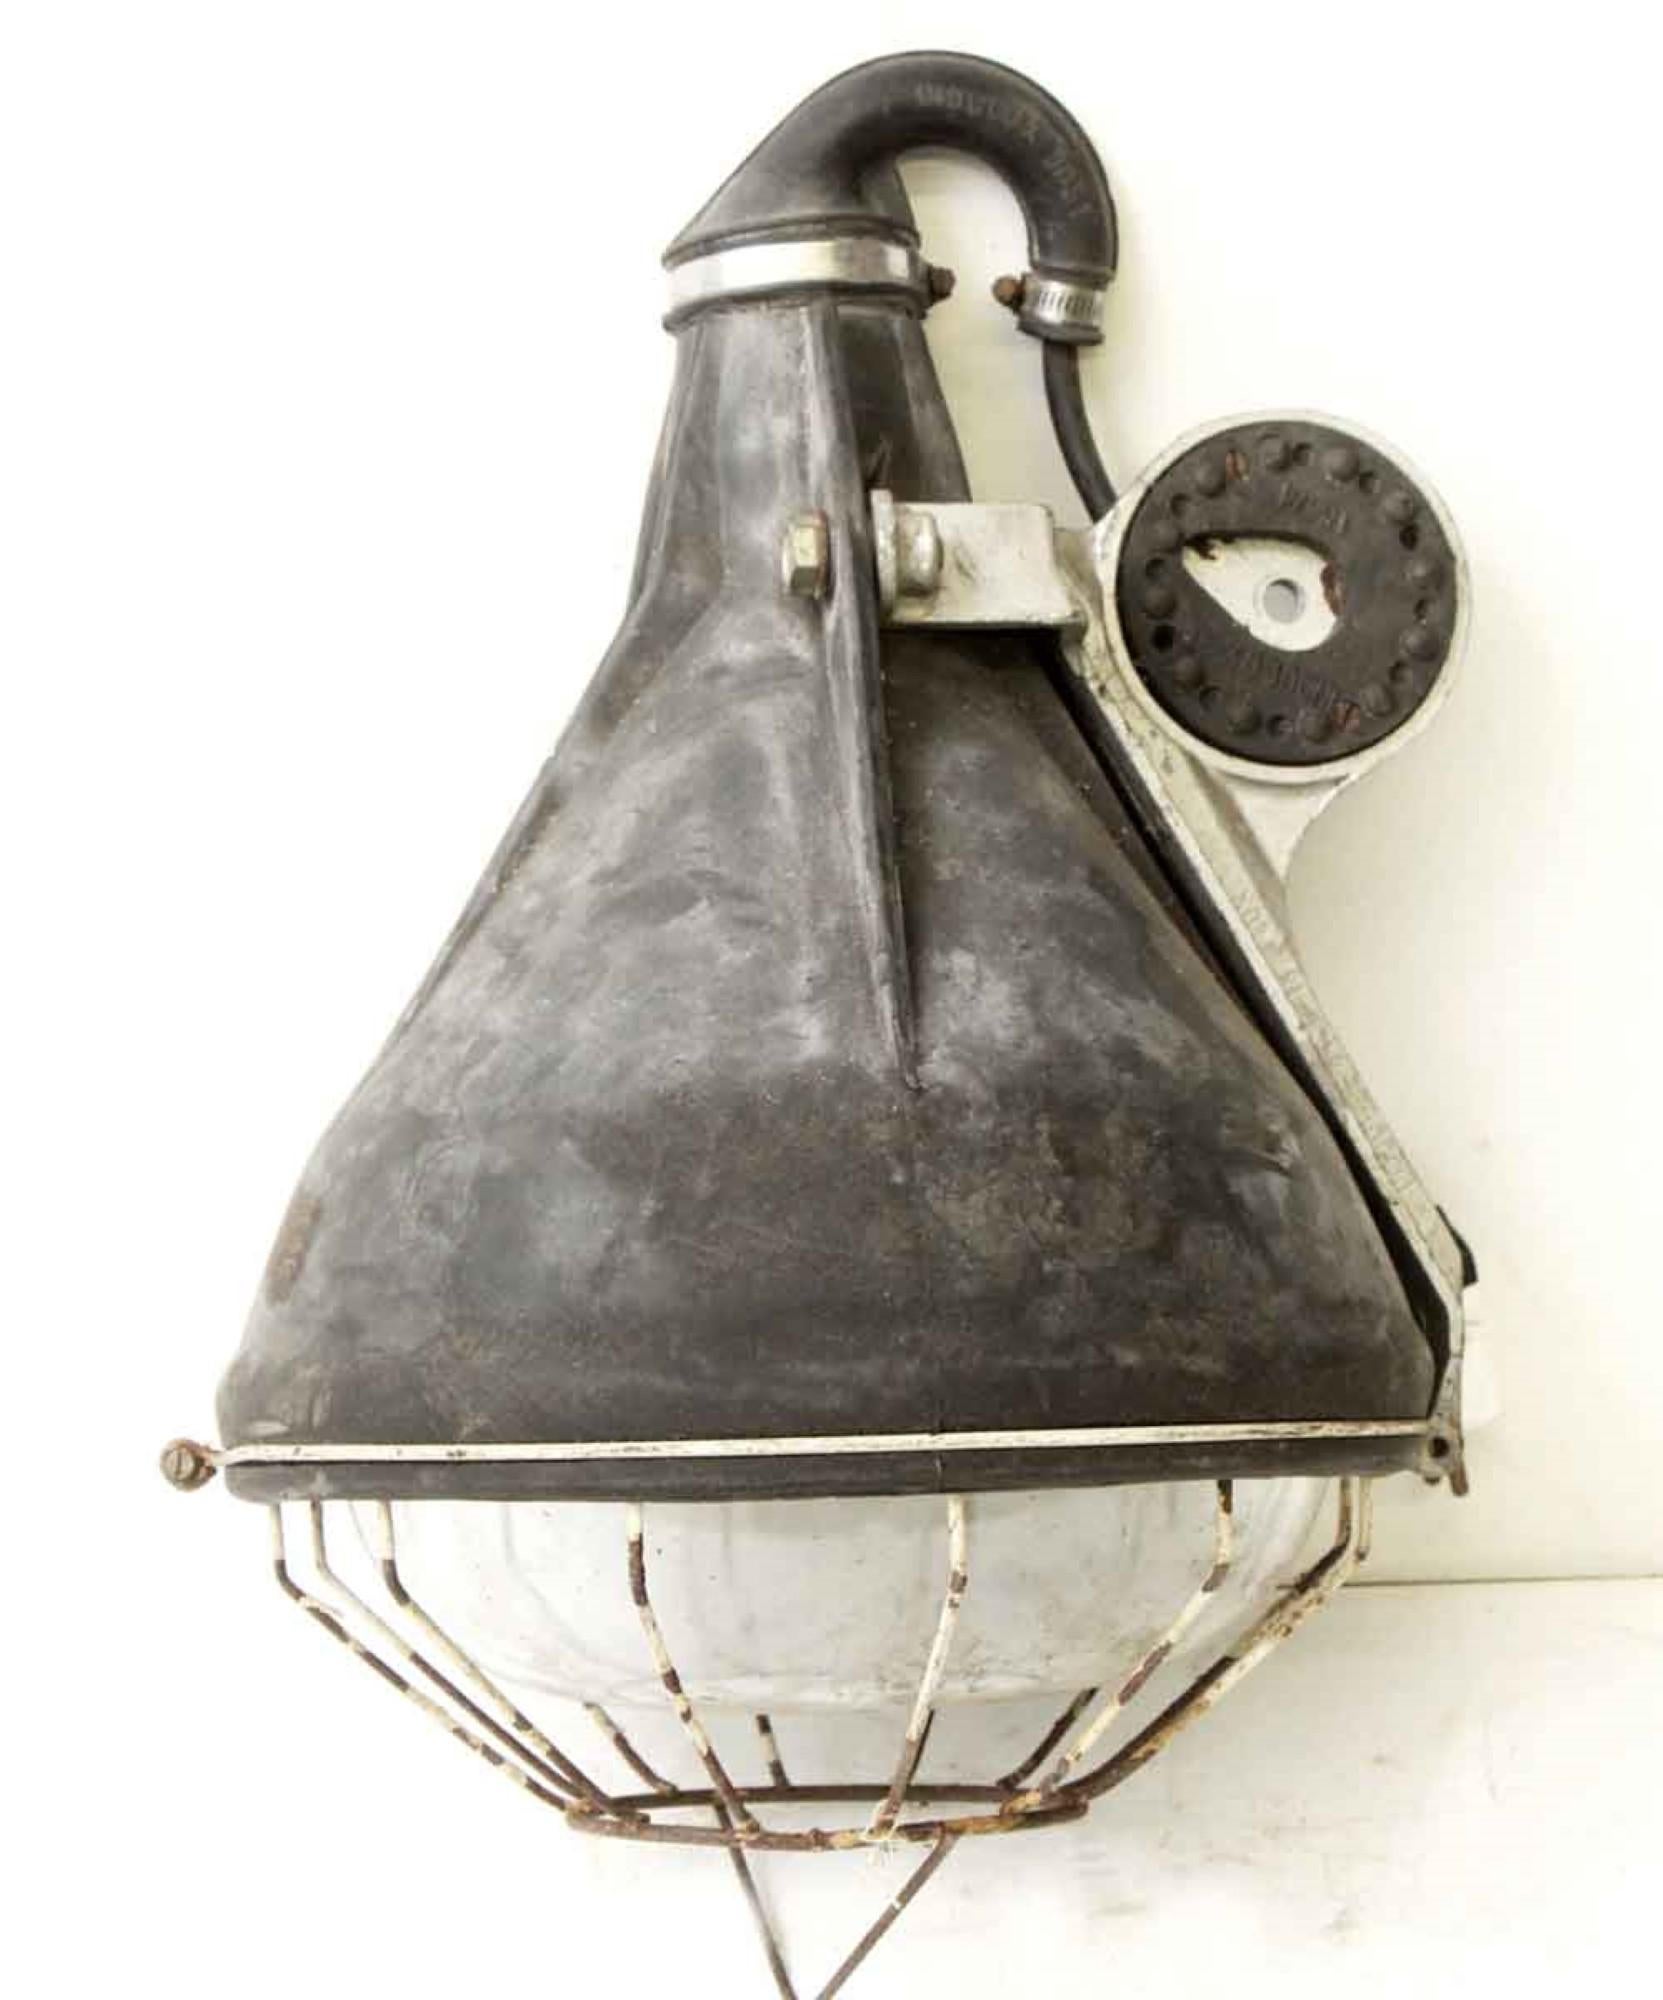 1970s industrial French hanging light with cage. Inscribed INDULUX, lw 9051. This can be seen at our 400 Gilligan St location in Scranton, PA